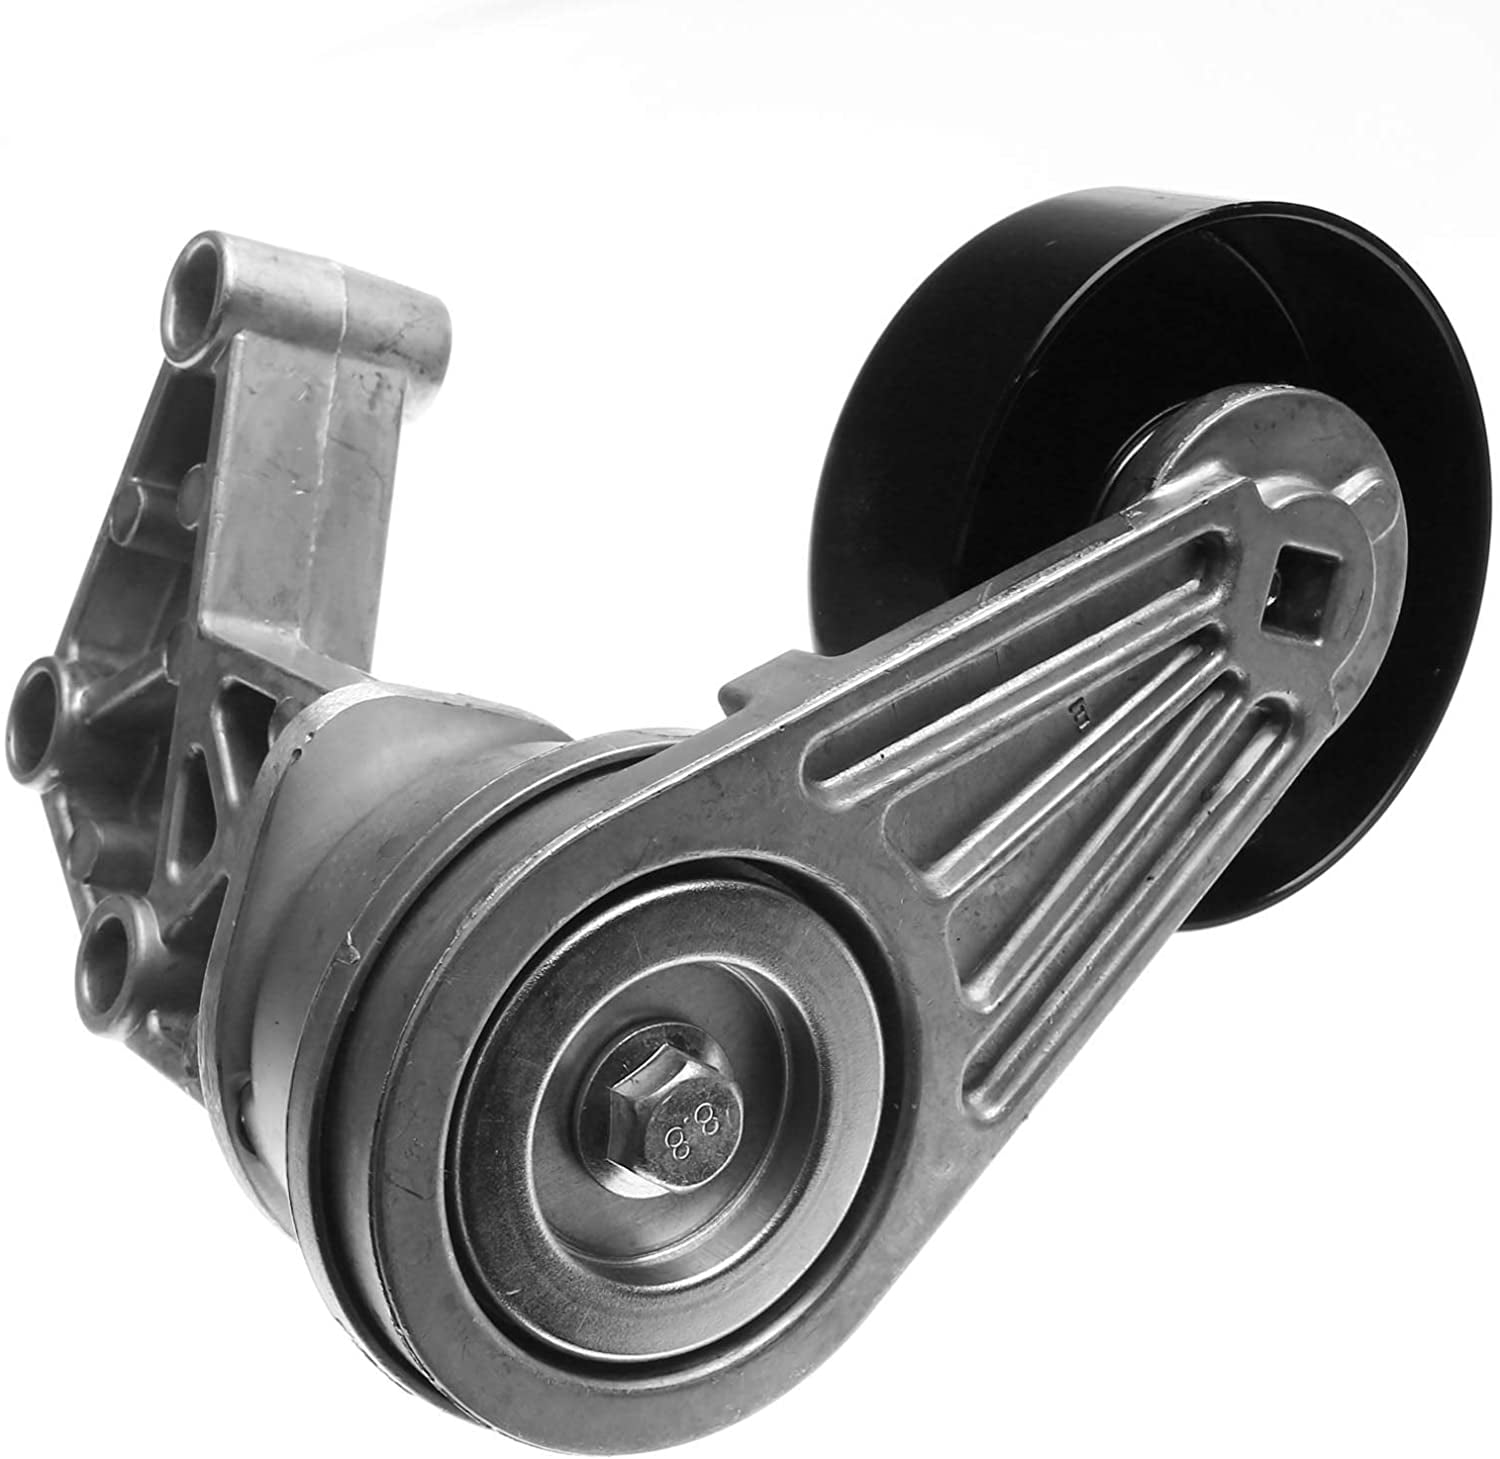 A-Premium A/C Air Condition Accessory Drive Belt Tensioner Assembly with Pulley Compatible with GMC Sonoma Chevrolet S10 1994-1997 LLV 1994-1995 2.2L 